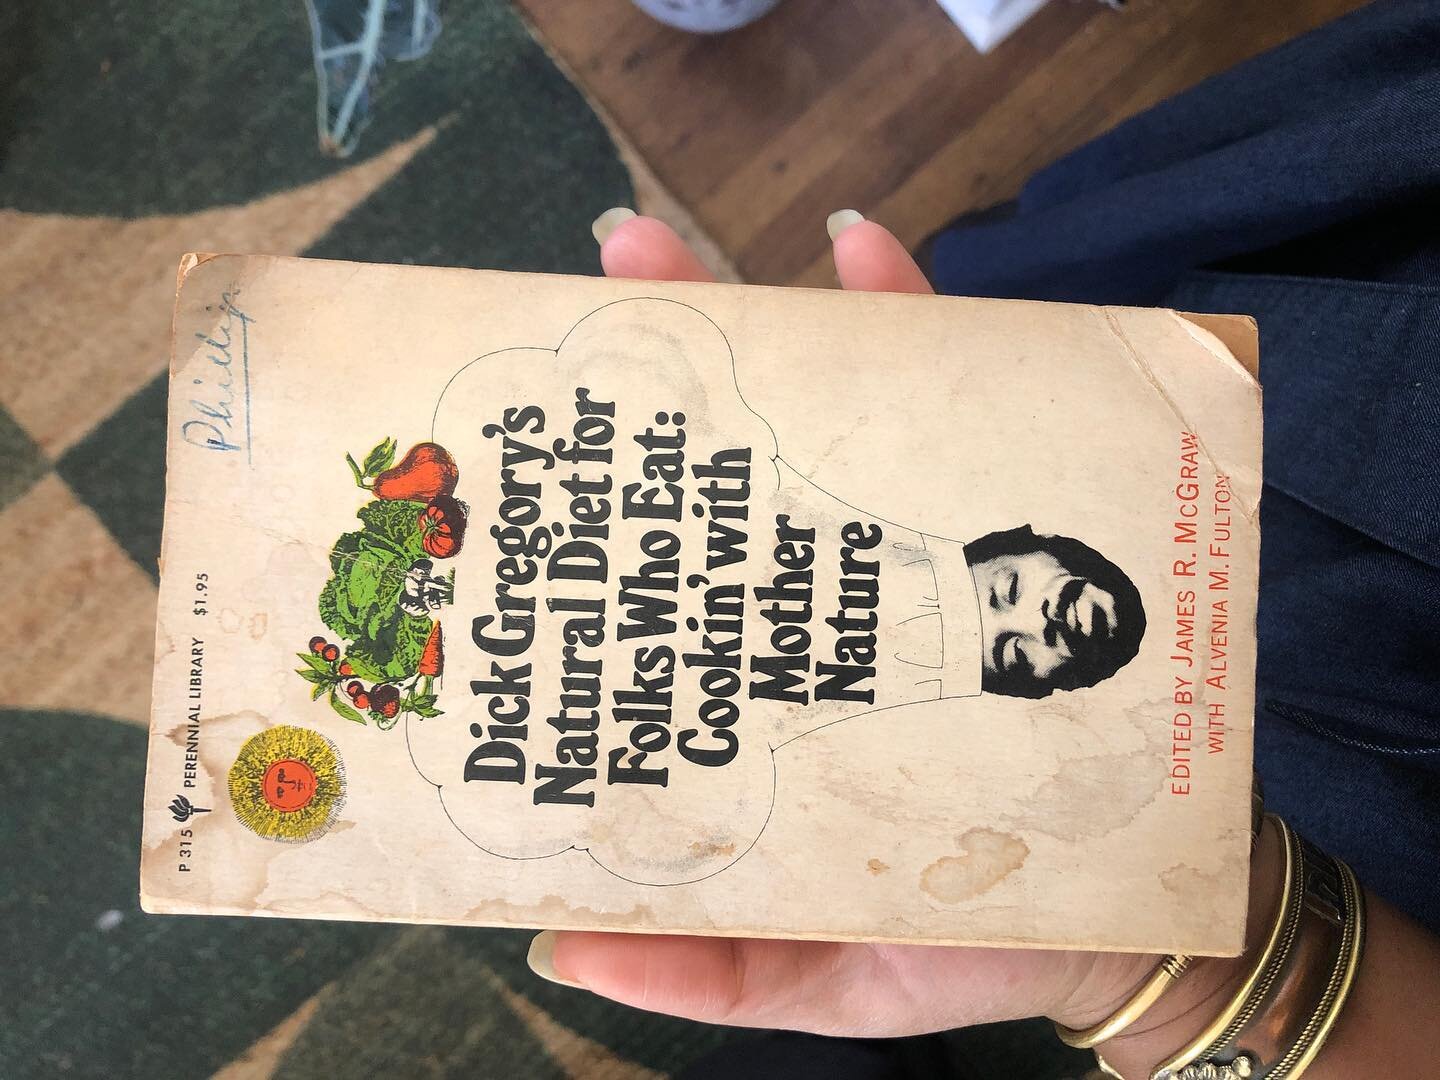 Found an original copy of Dick Gregory&rsquo;s cookbook tossed in a box of dusty books at restore &mdash; for y&rsquo;all who don&rsquo;t have access to dusty boxes of gold, Feast Afrique put together an amazing digital library of cookbooks mentioned